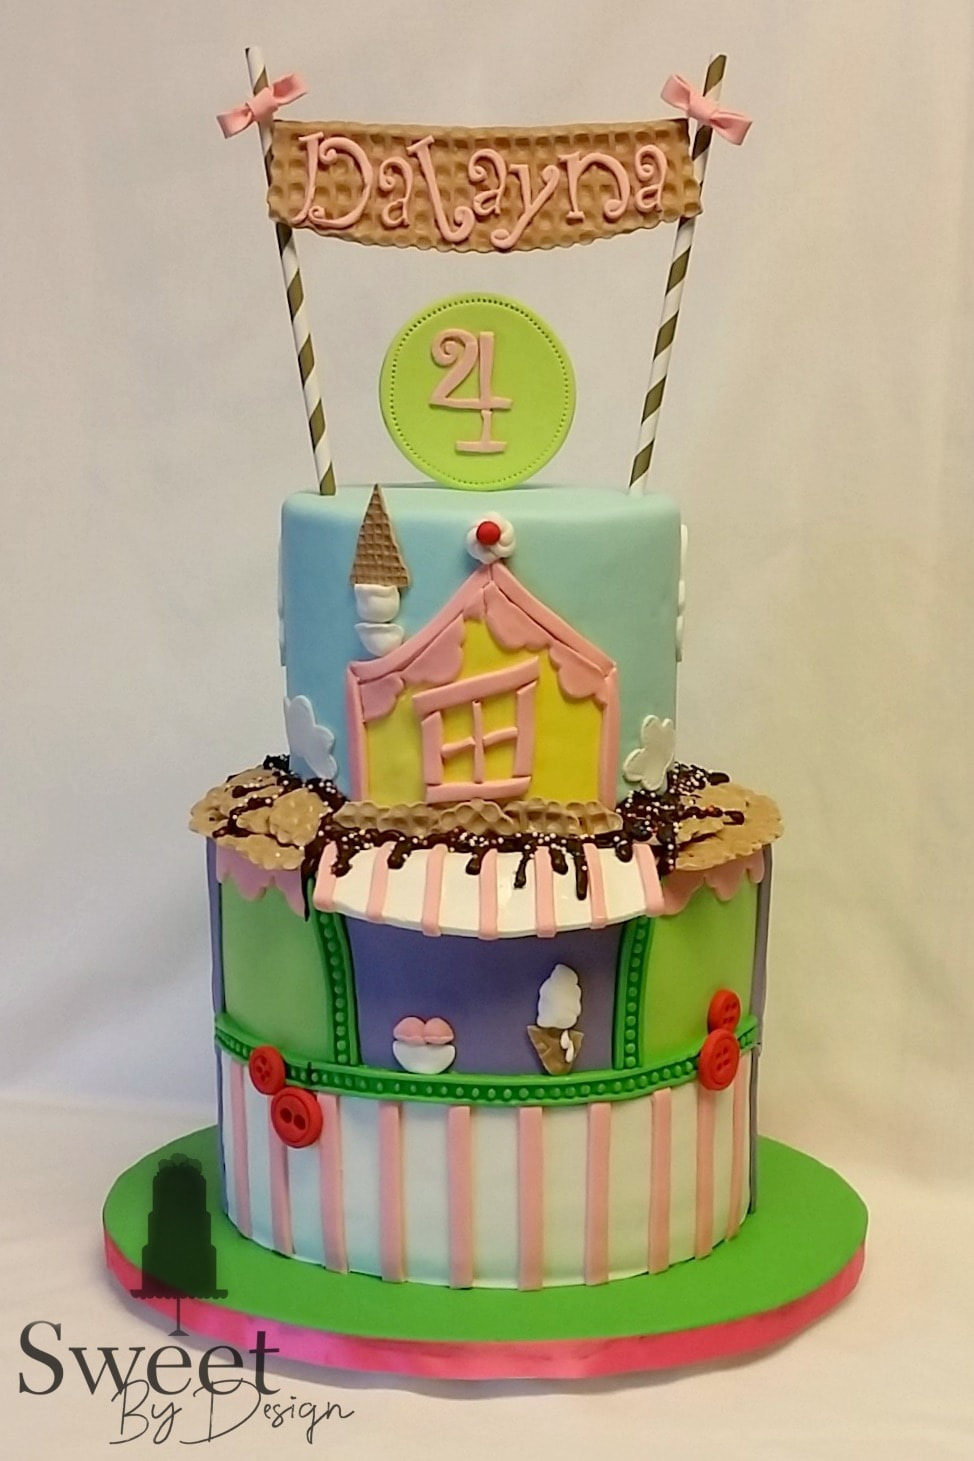 Ice cream shop birthday cake by Sweet By Design